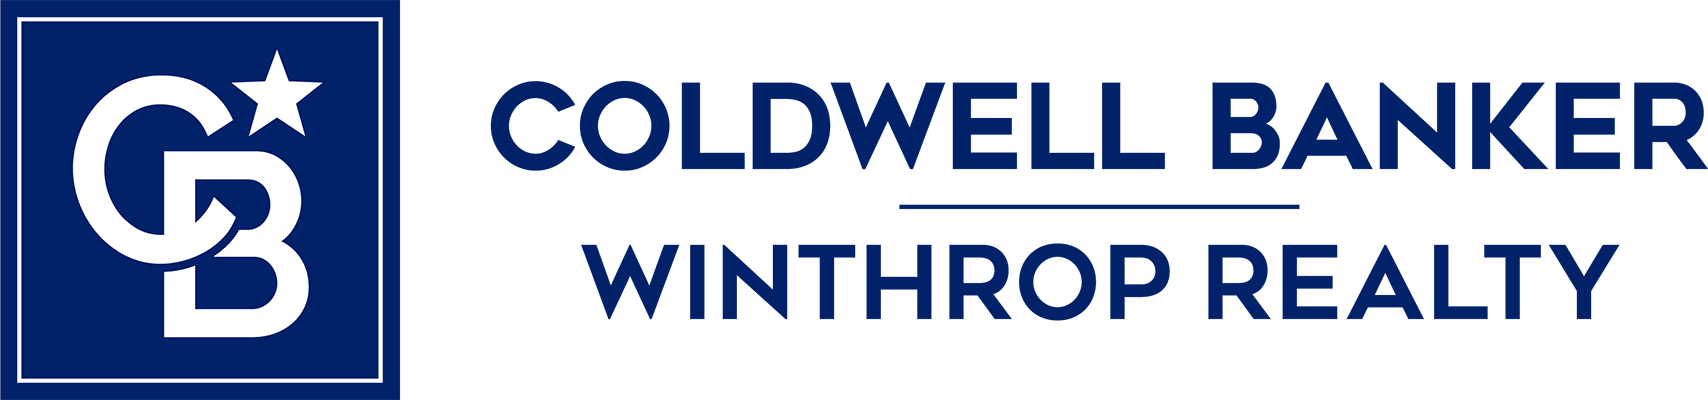 Coldwell Banker - Winthrop Realty